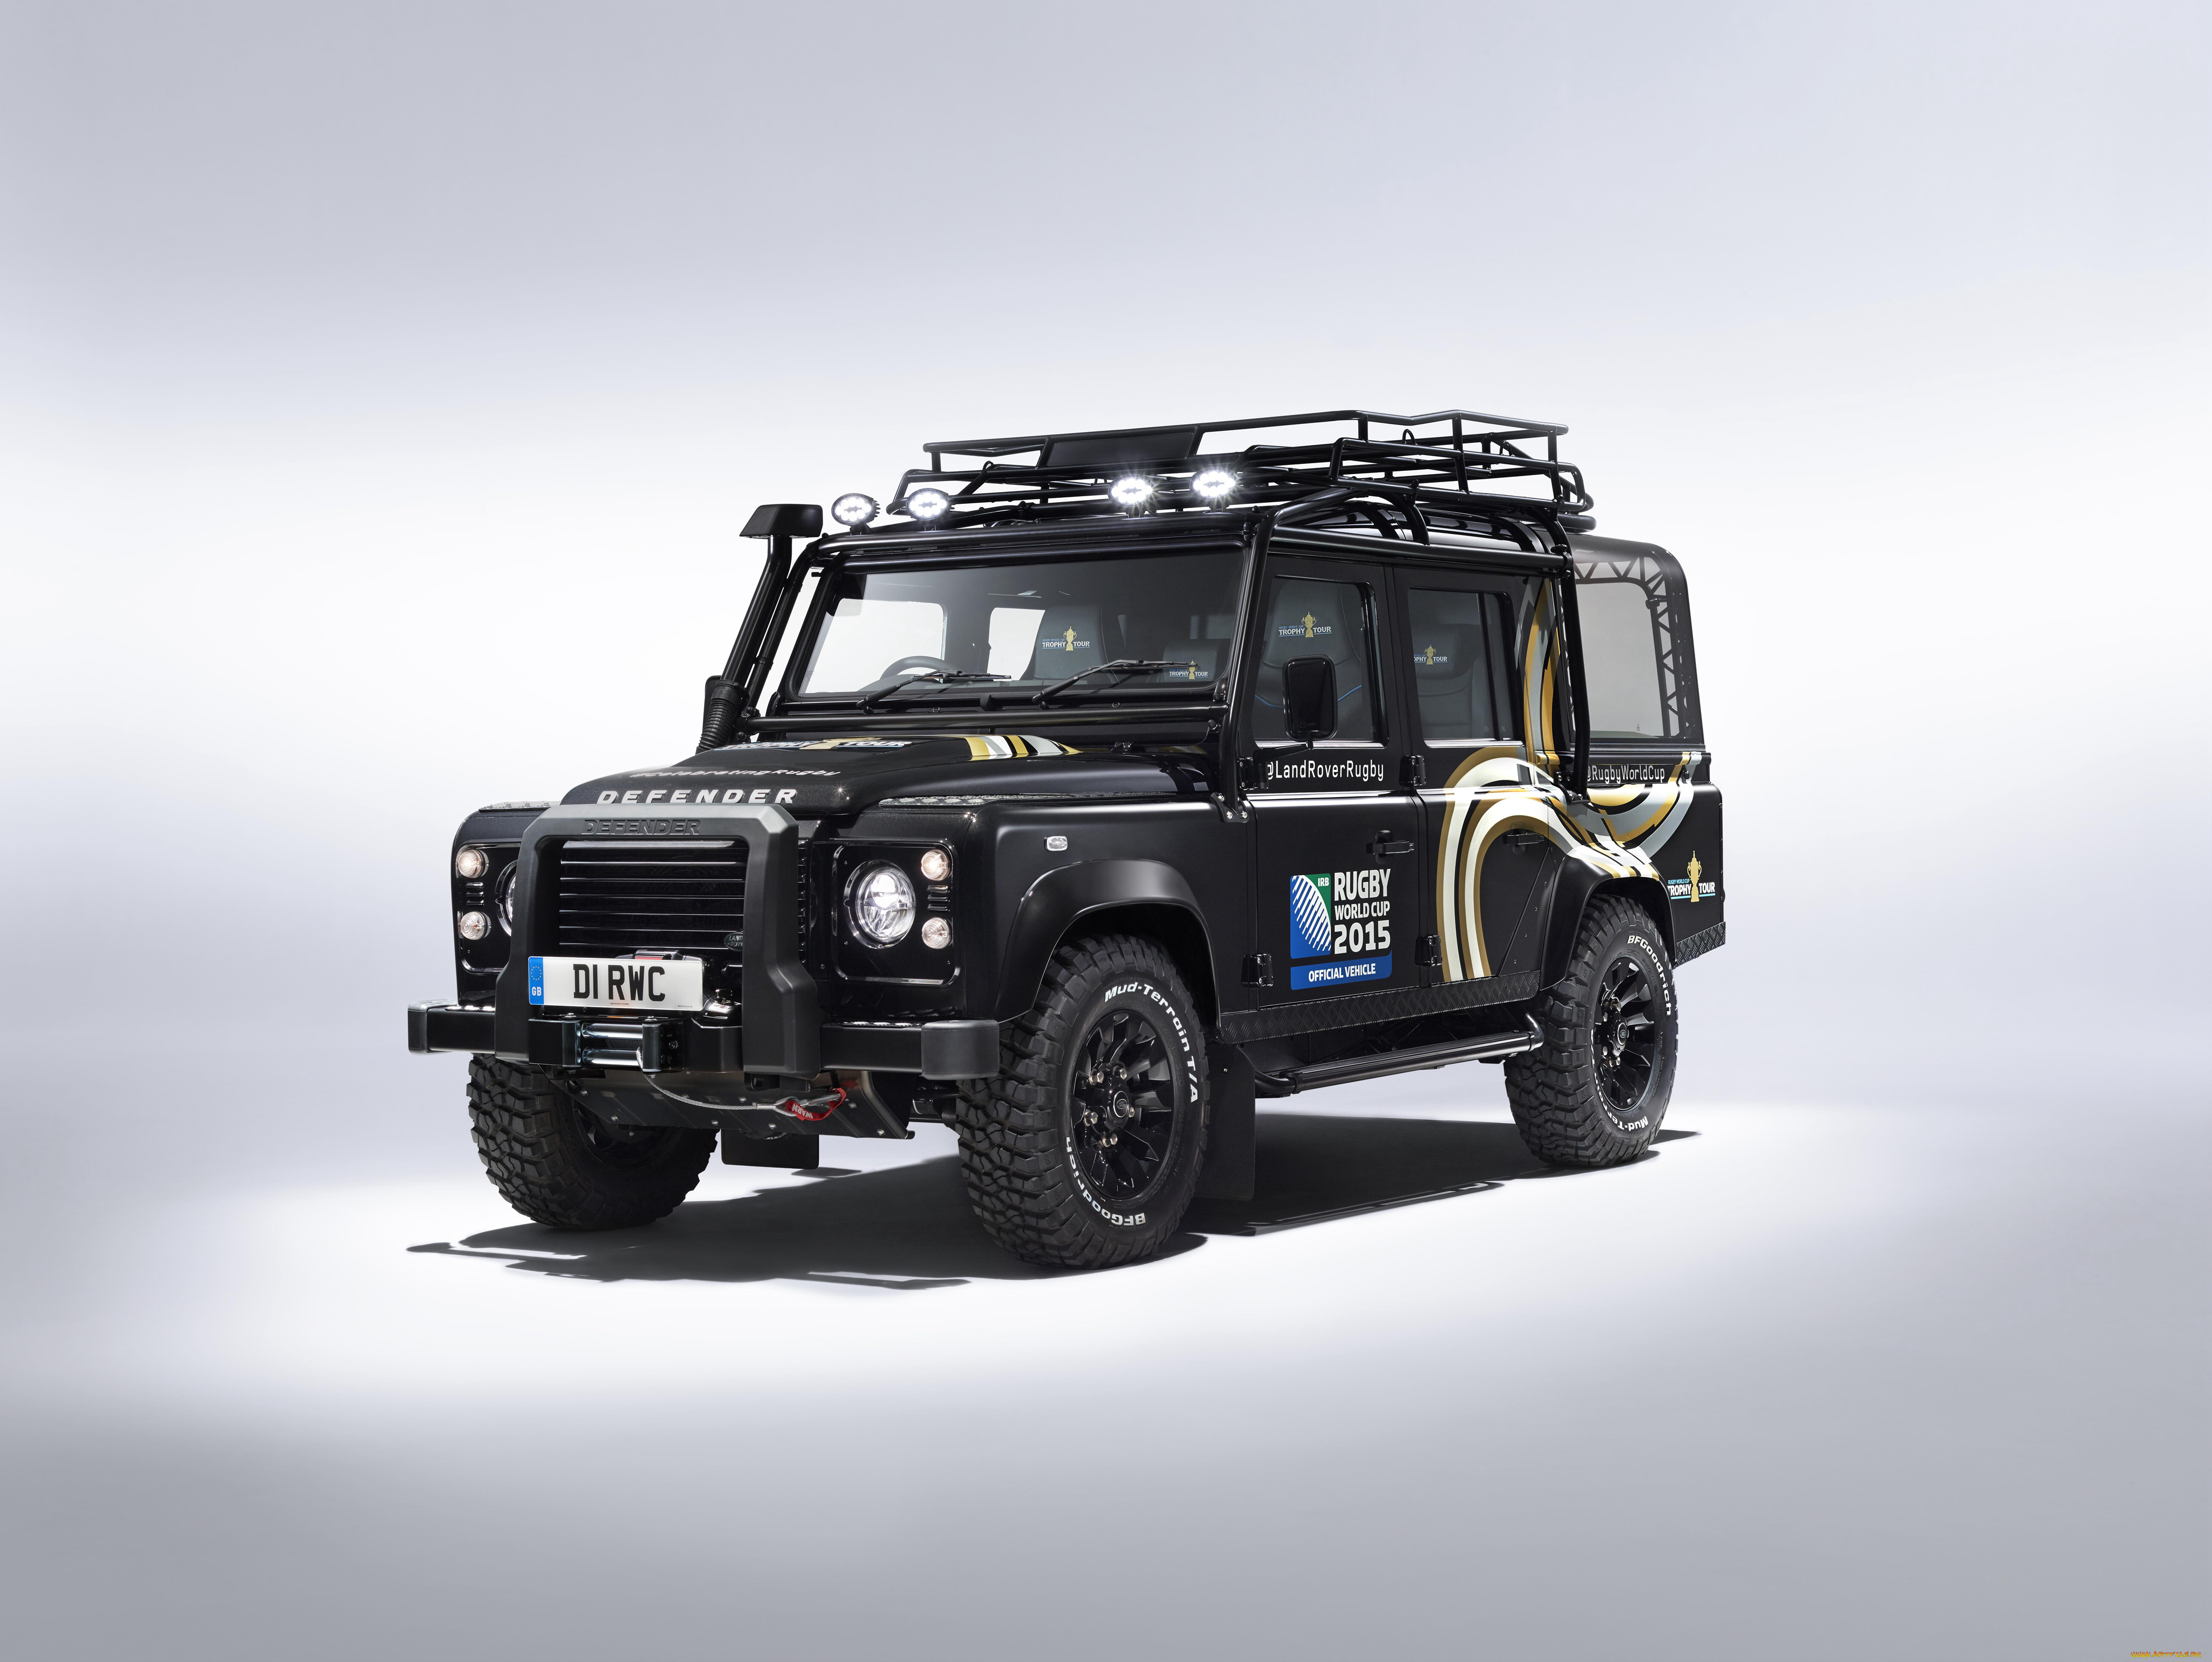 автомобили, land-rover, world, rugby, defender, 110, land, rover, cup, 2015г